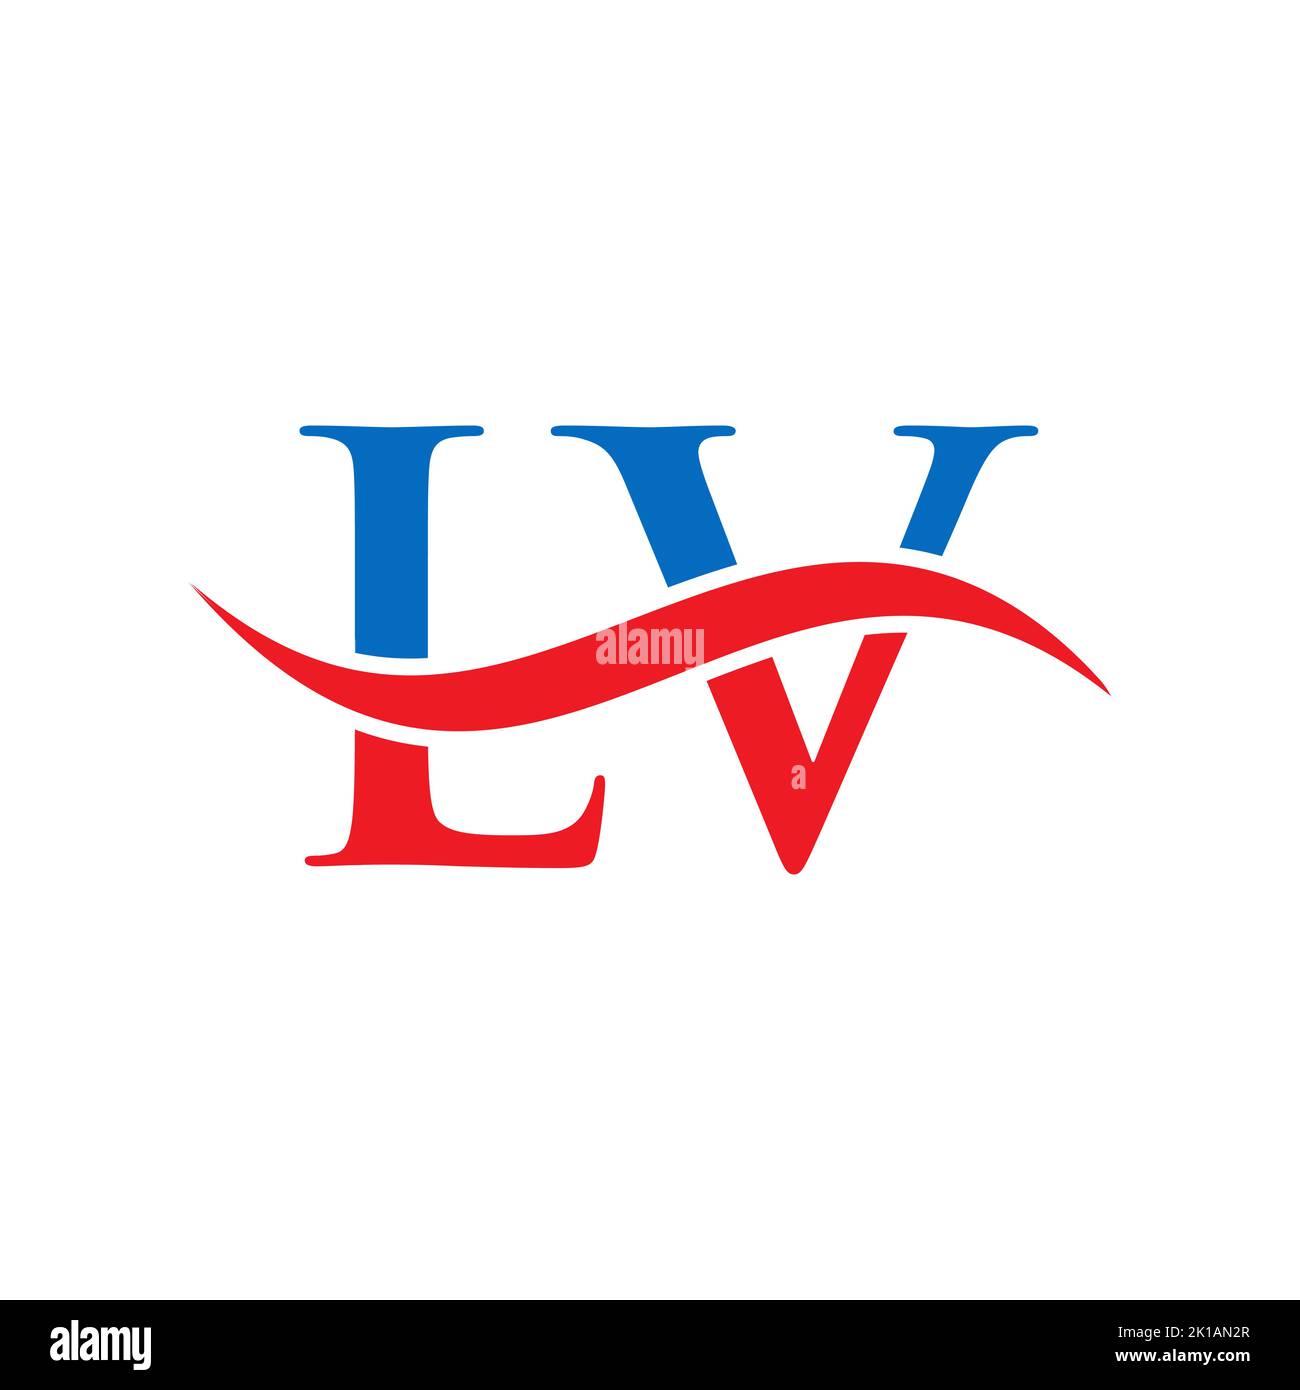 Lv insurance sign Stock Vector Images - Alamy